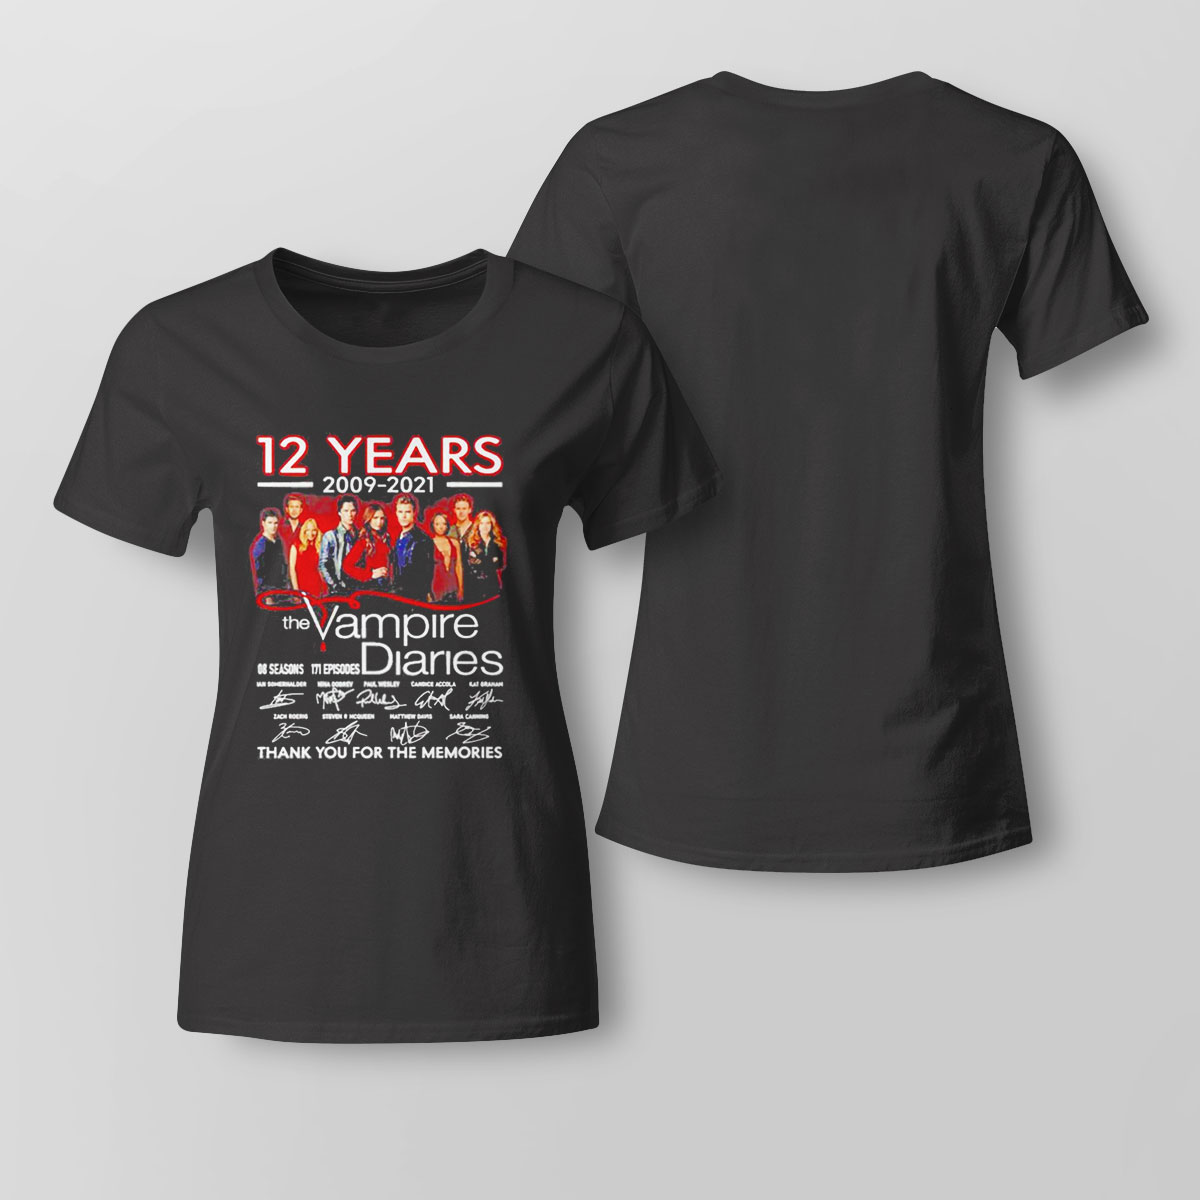 13 Years The Vampire Diaries 8 Season 171 Episodes 2009 2022 Thank You For The Memories Shirt Long Sleeve, Ladies Tee